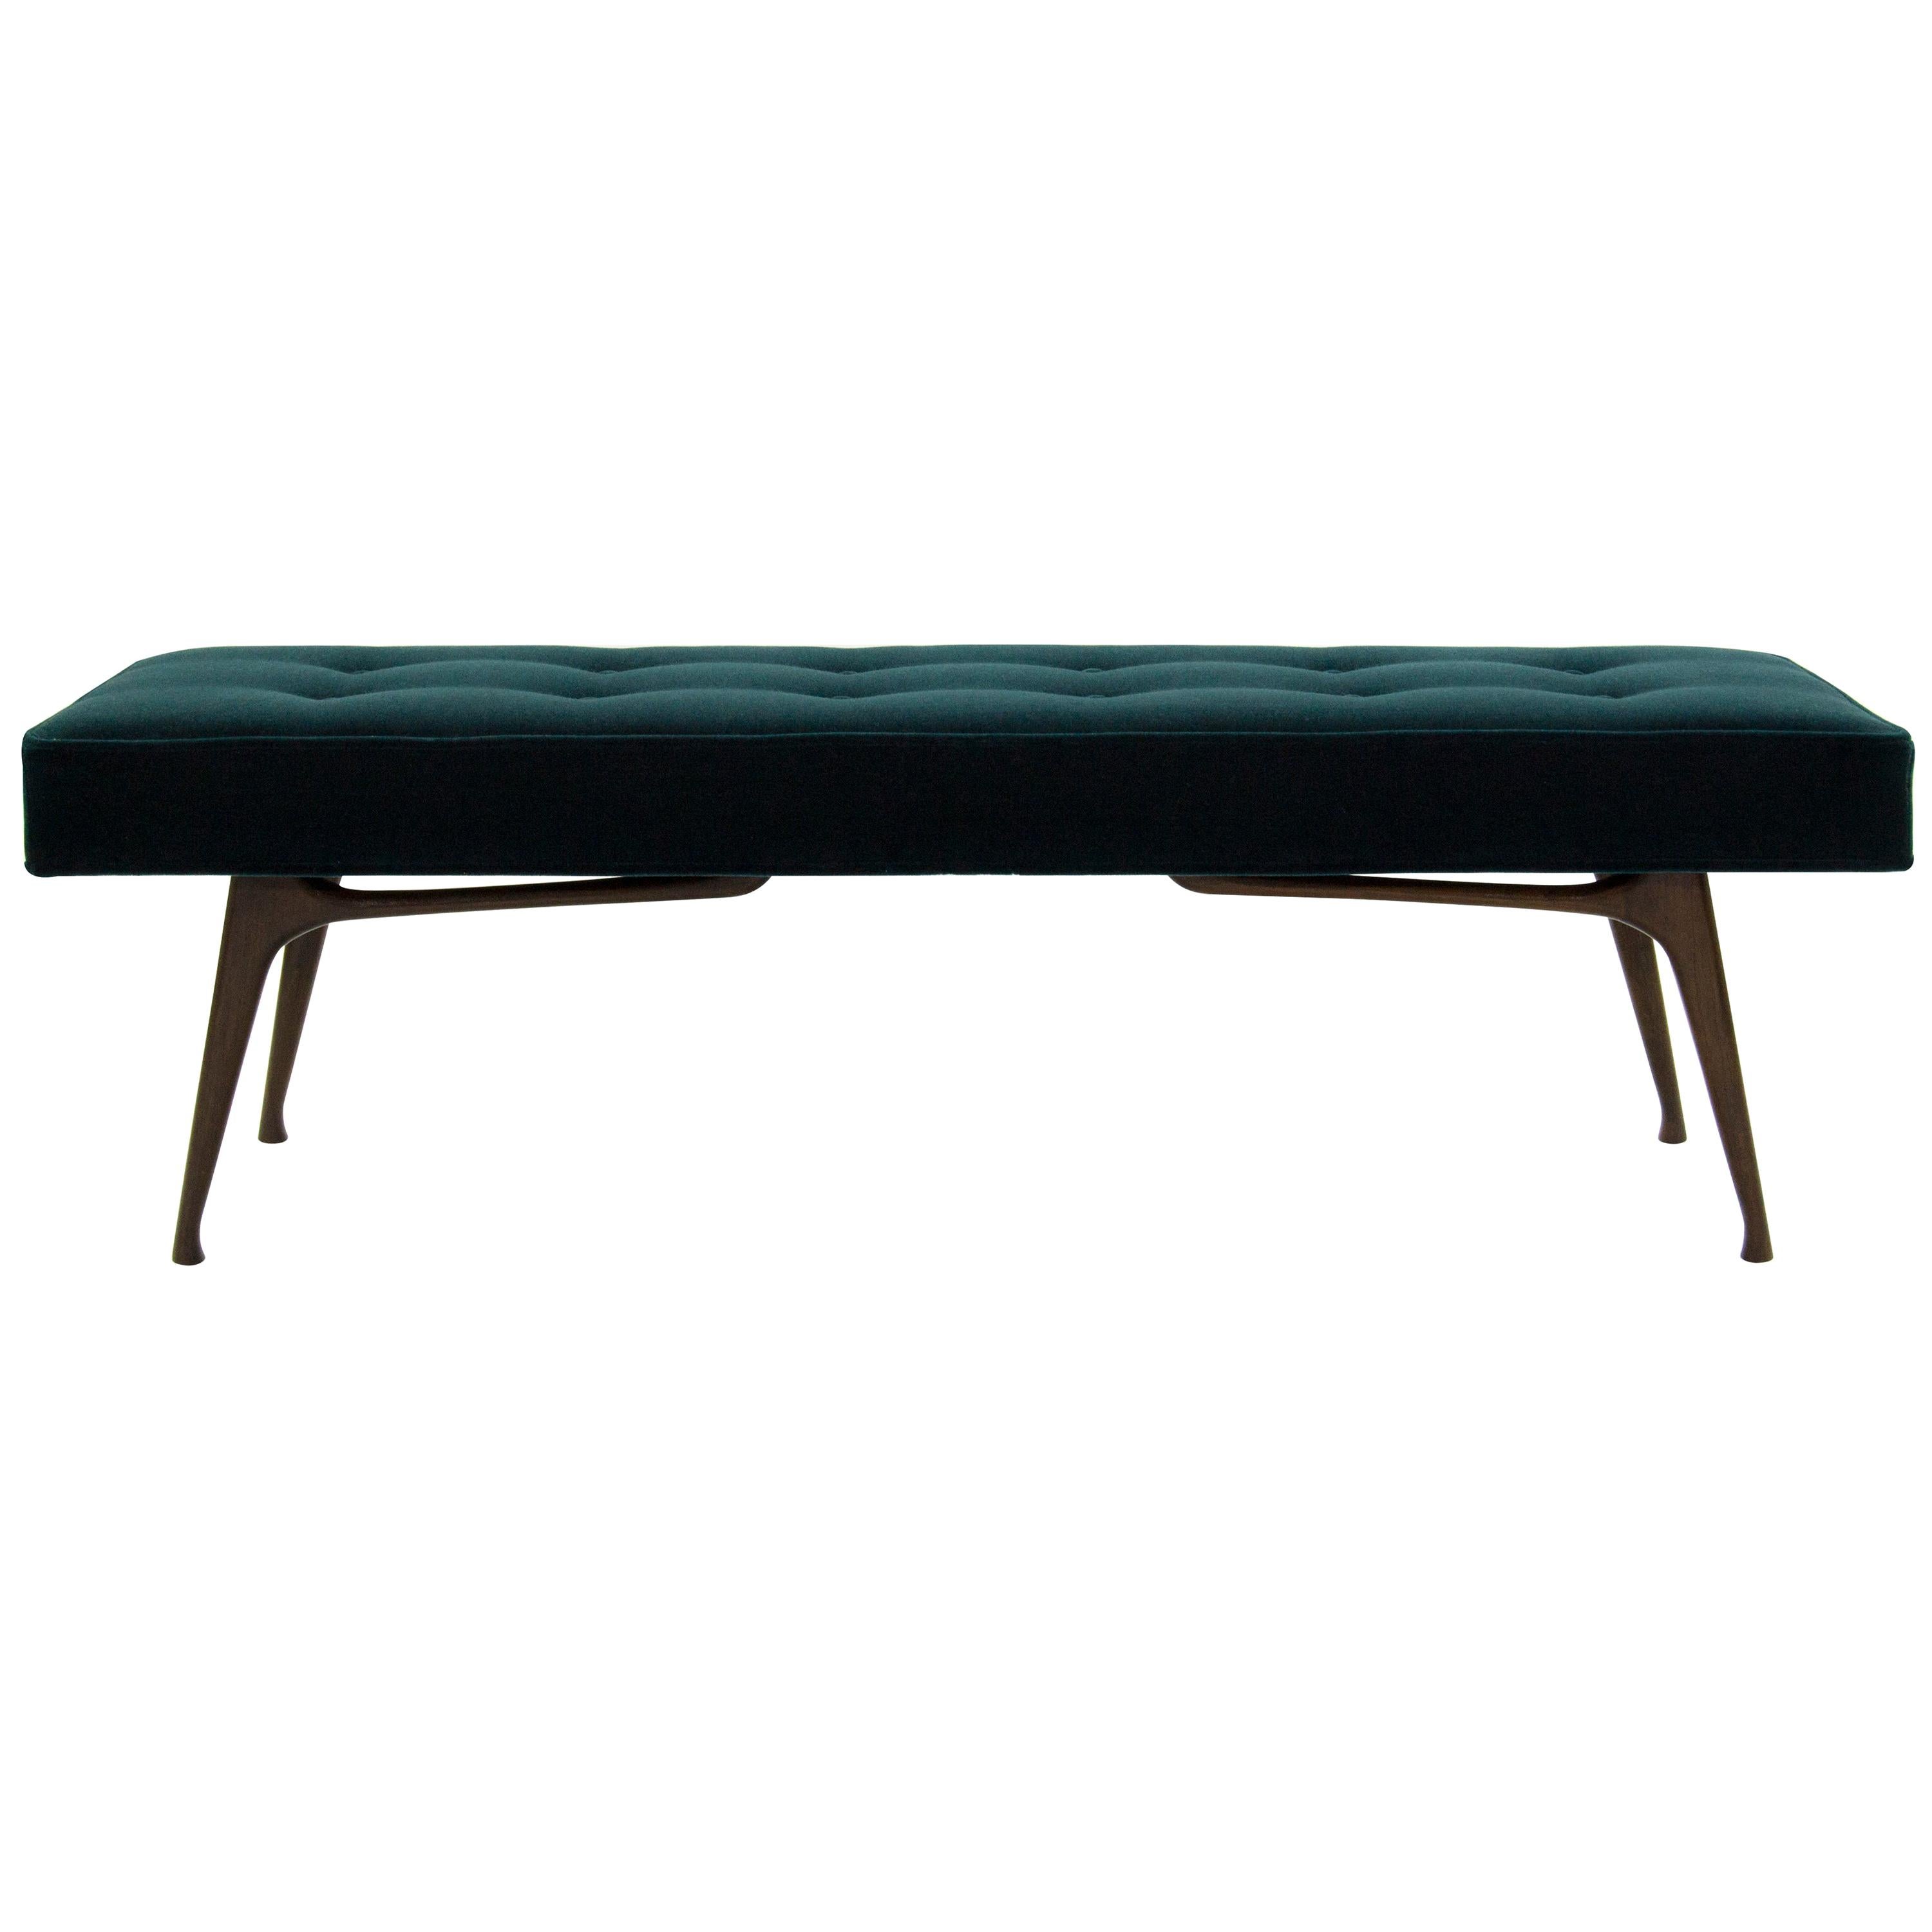 Sculptural Bench in the Style of Ico Parisi, 1950s